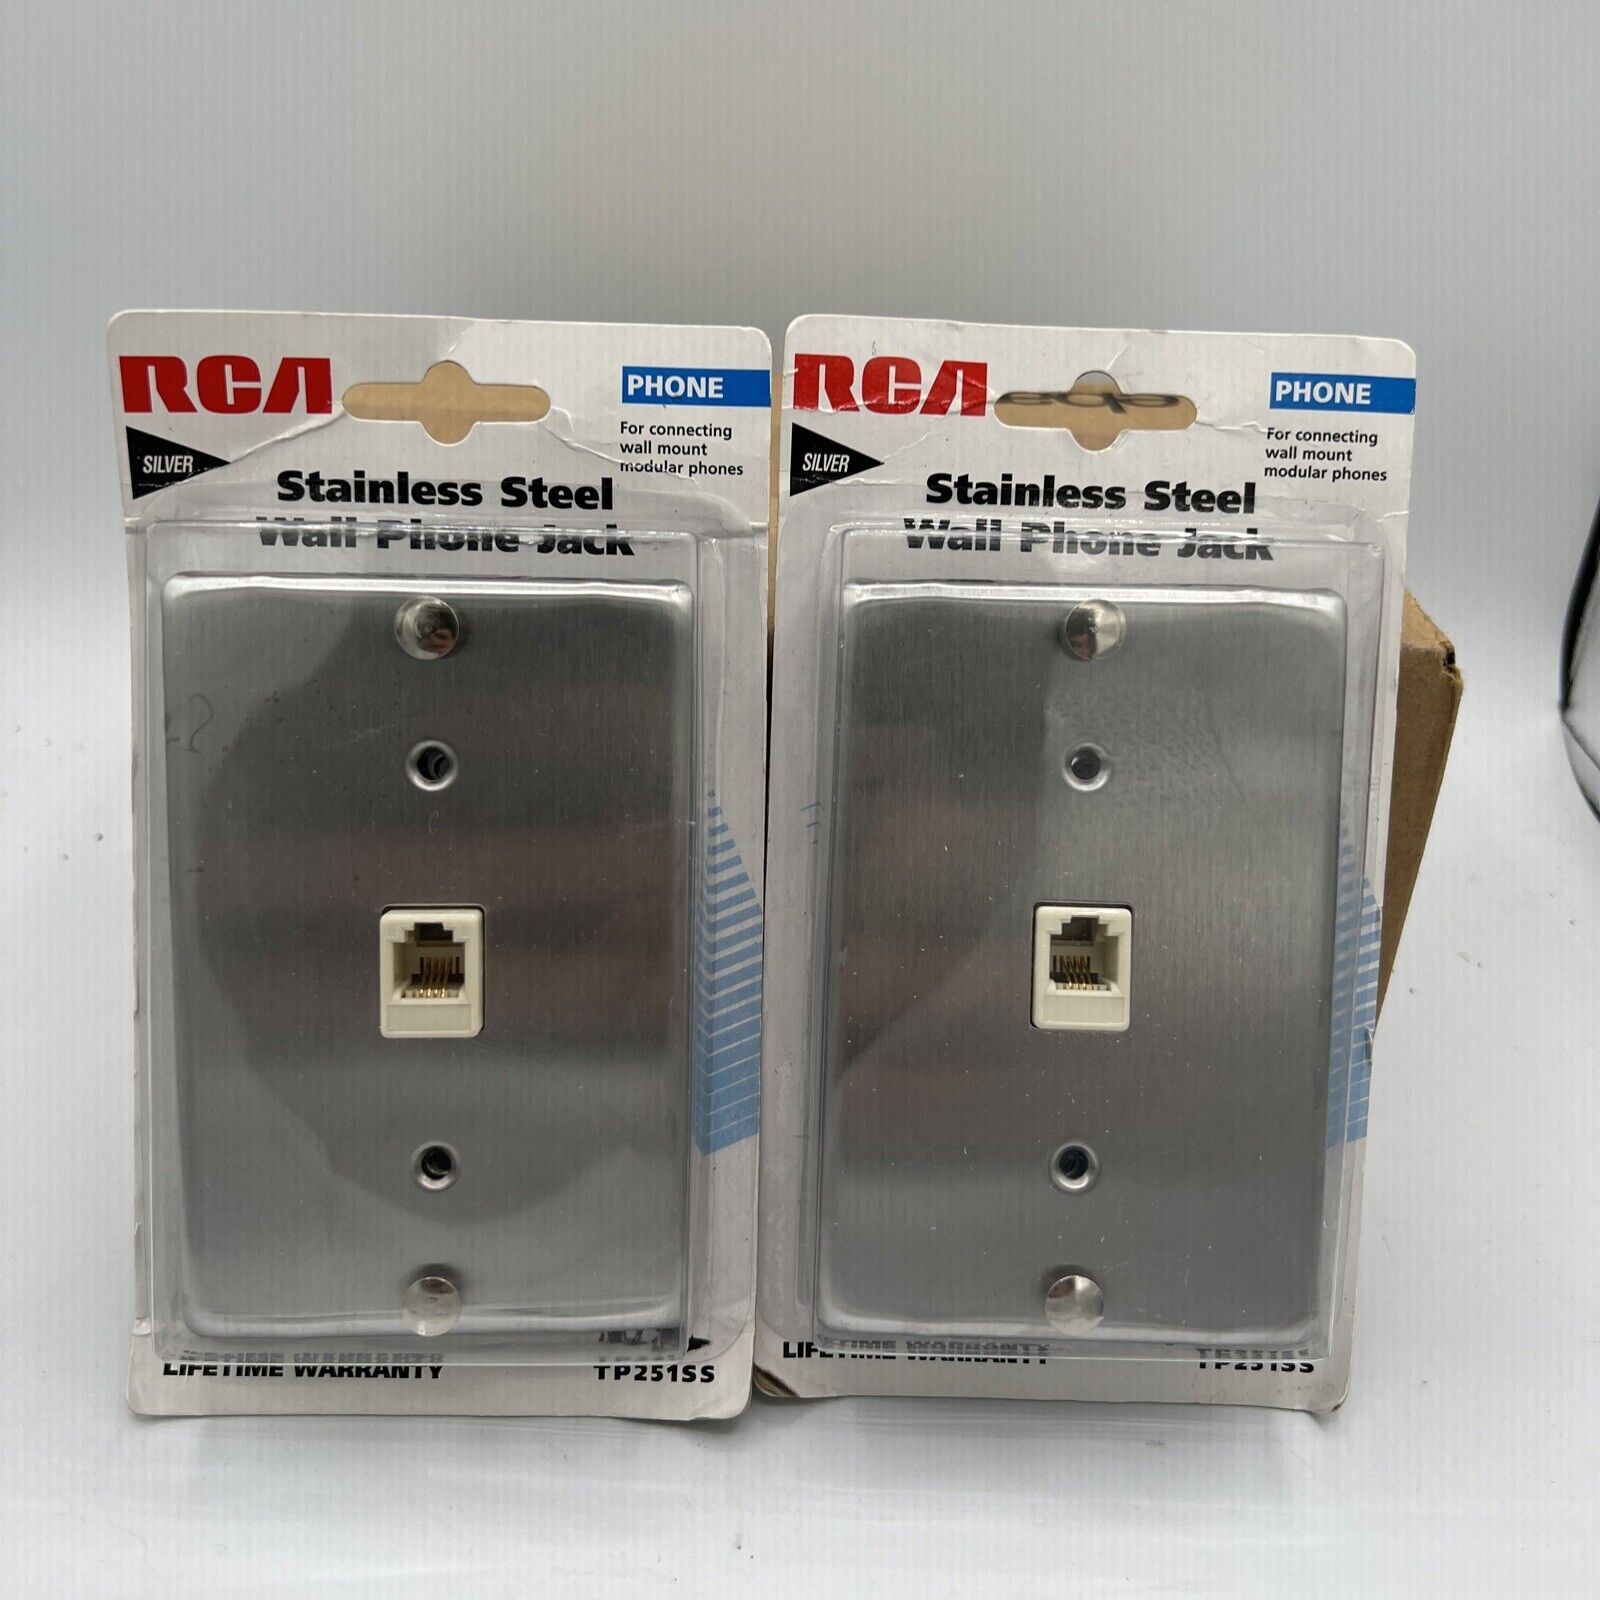 RCA Stainless Steel Silver Wall Mount Modular Phone Jack TP251SS LOT OF 2